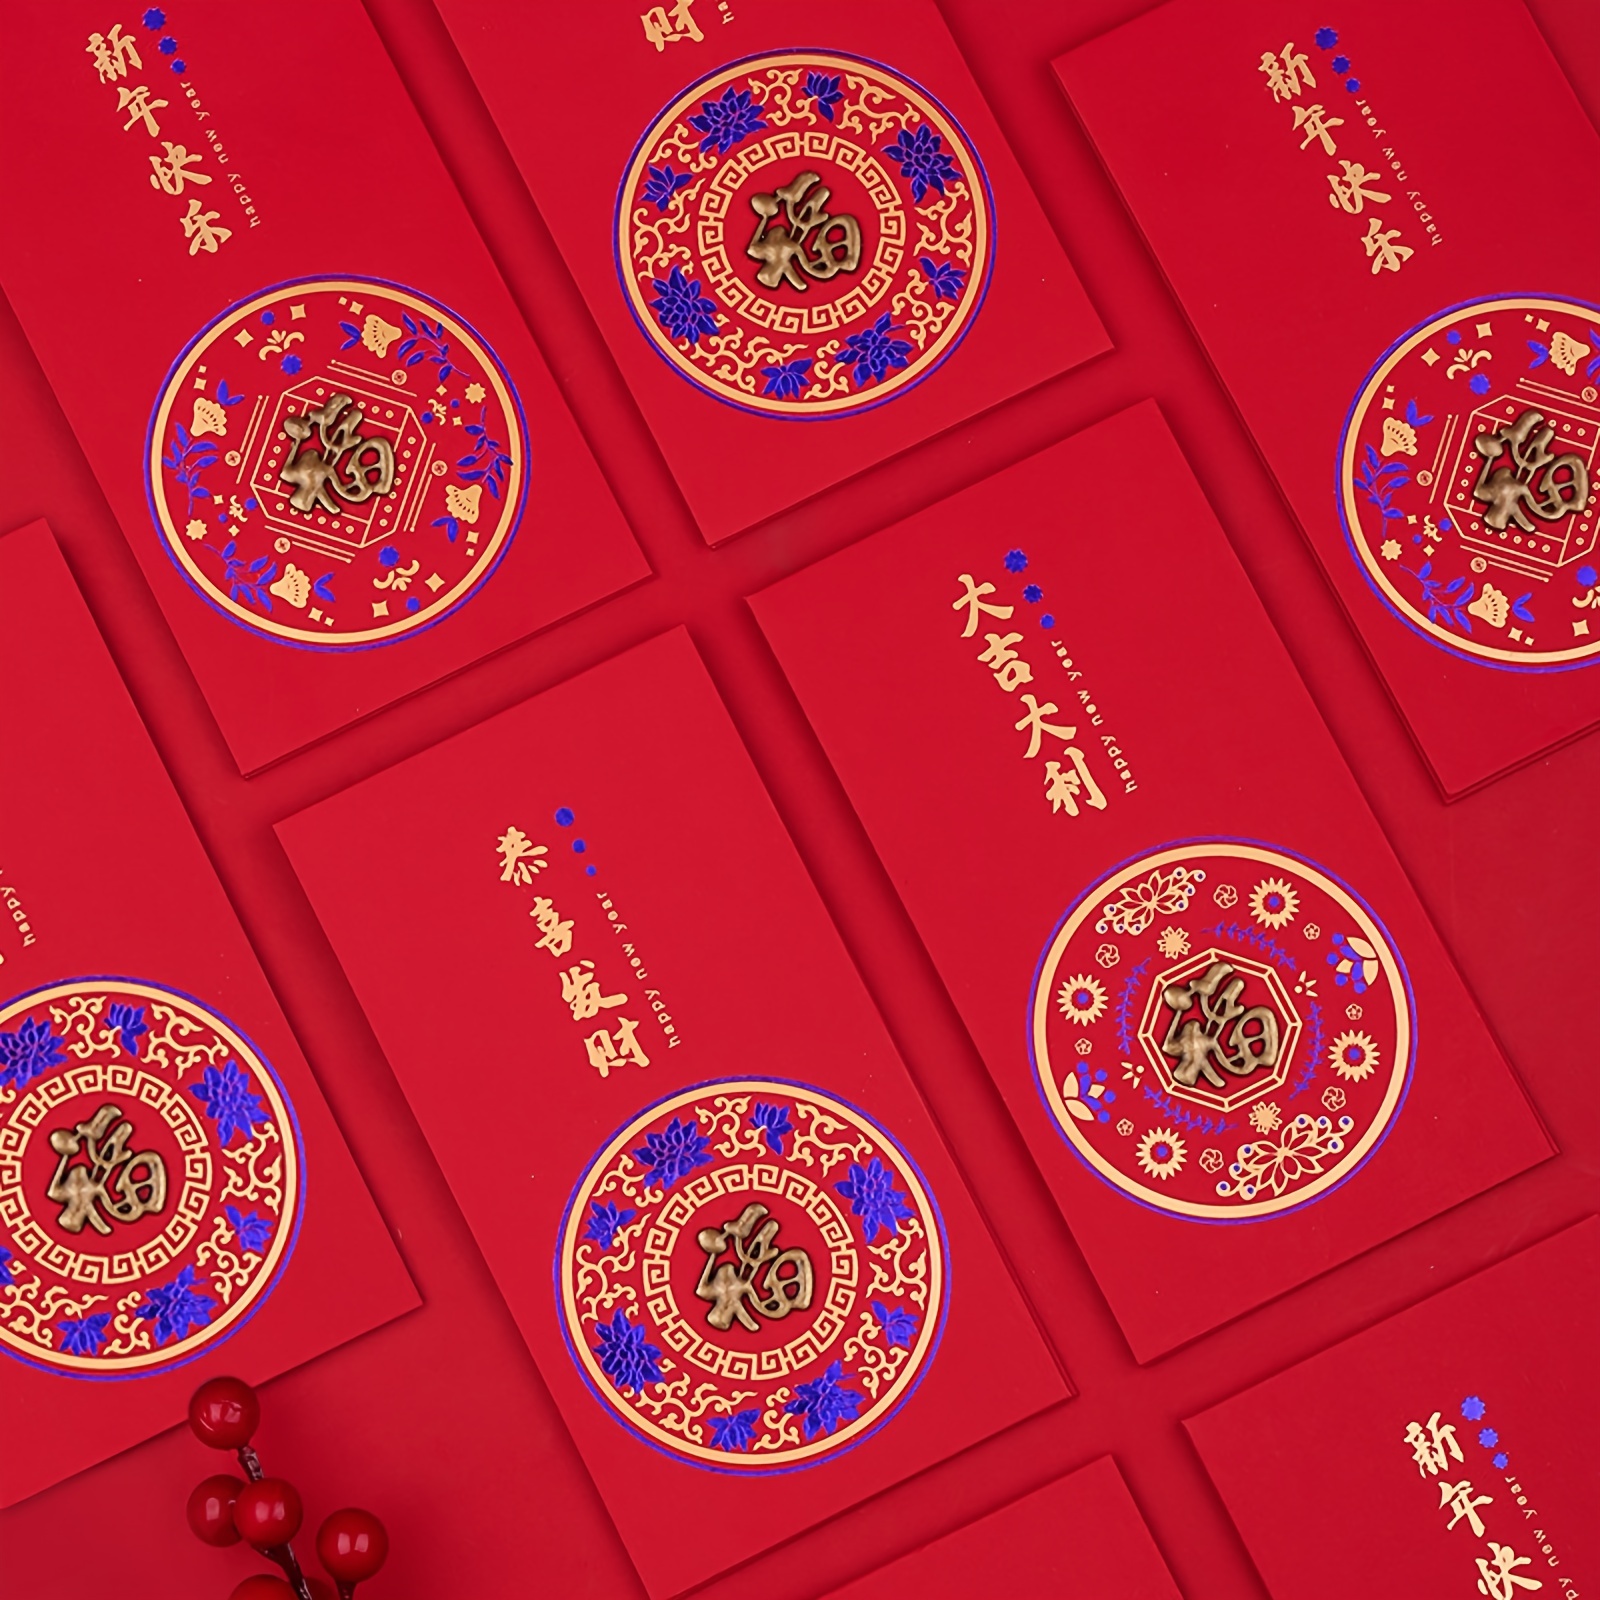 1 Pack 4pcs Chinese Red Packet Lucky Money Chinese New Year Gift